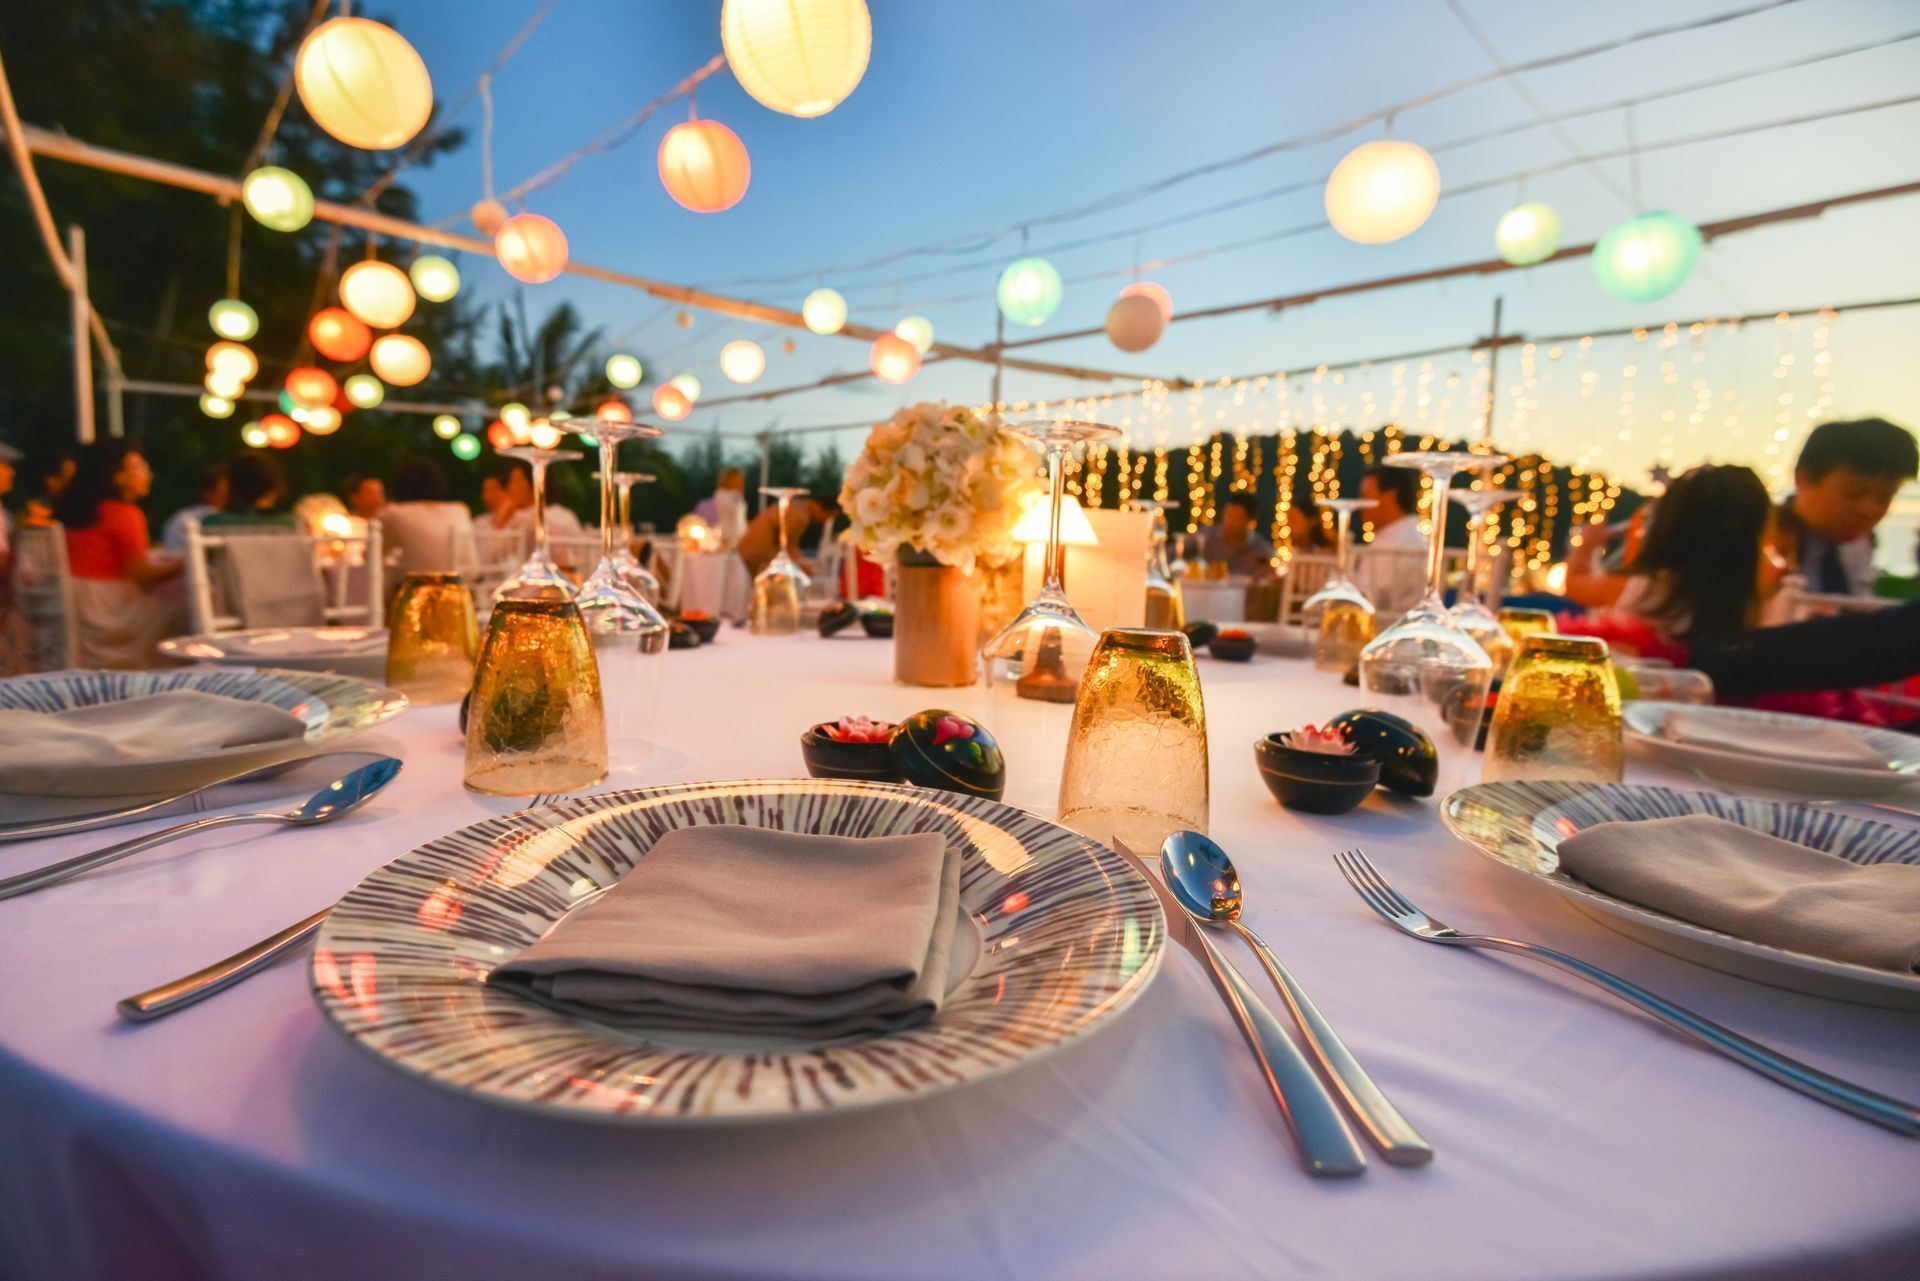 A table set for a wedding reception with plates , glasses , and silverware.